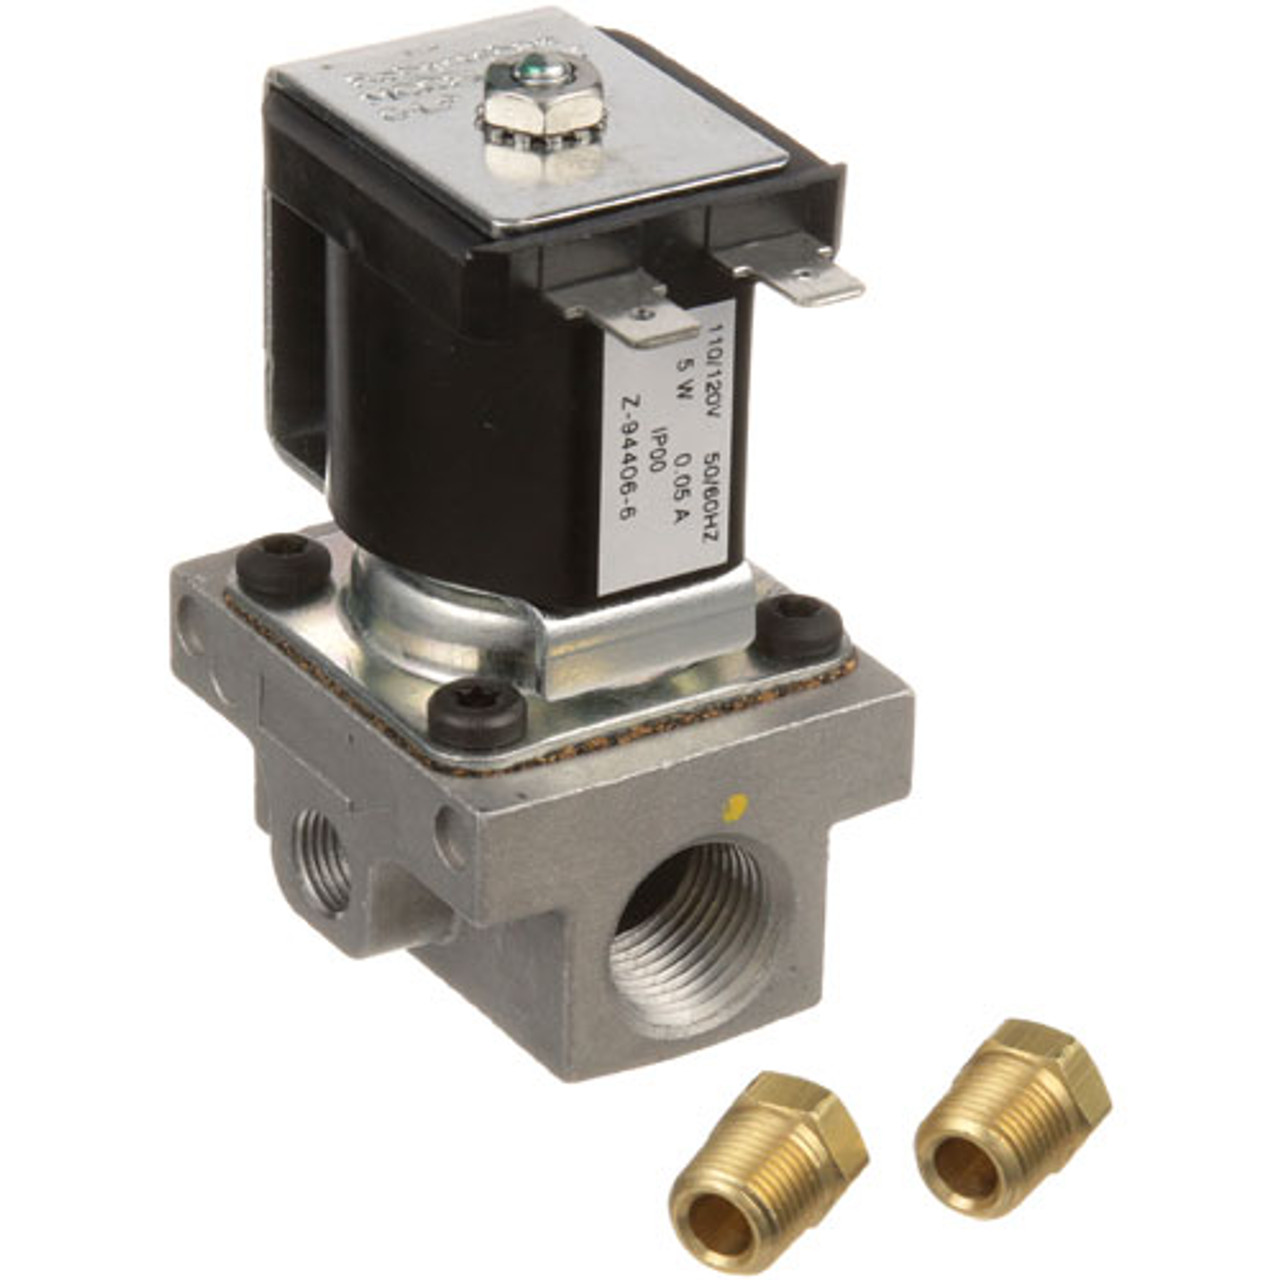 Gas Solenoid Valve - Replacement Part For Garland 227160-1